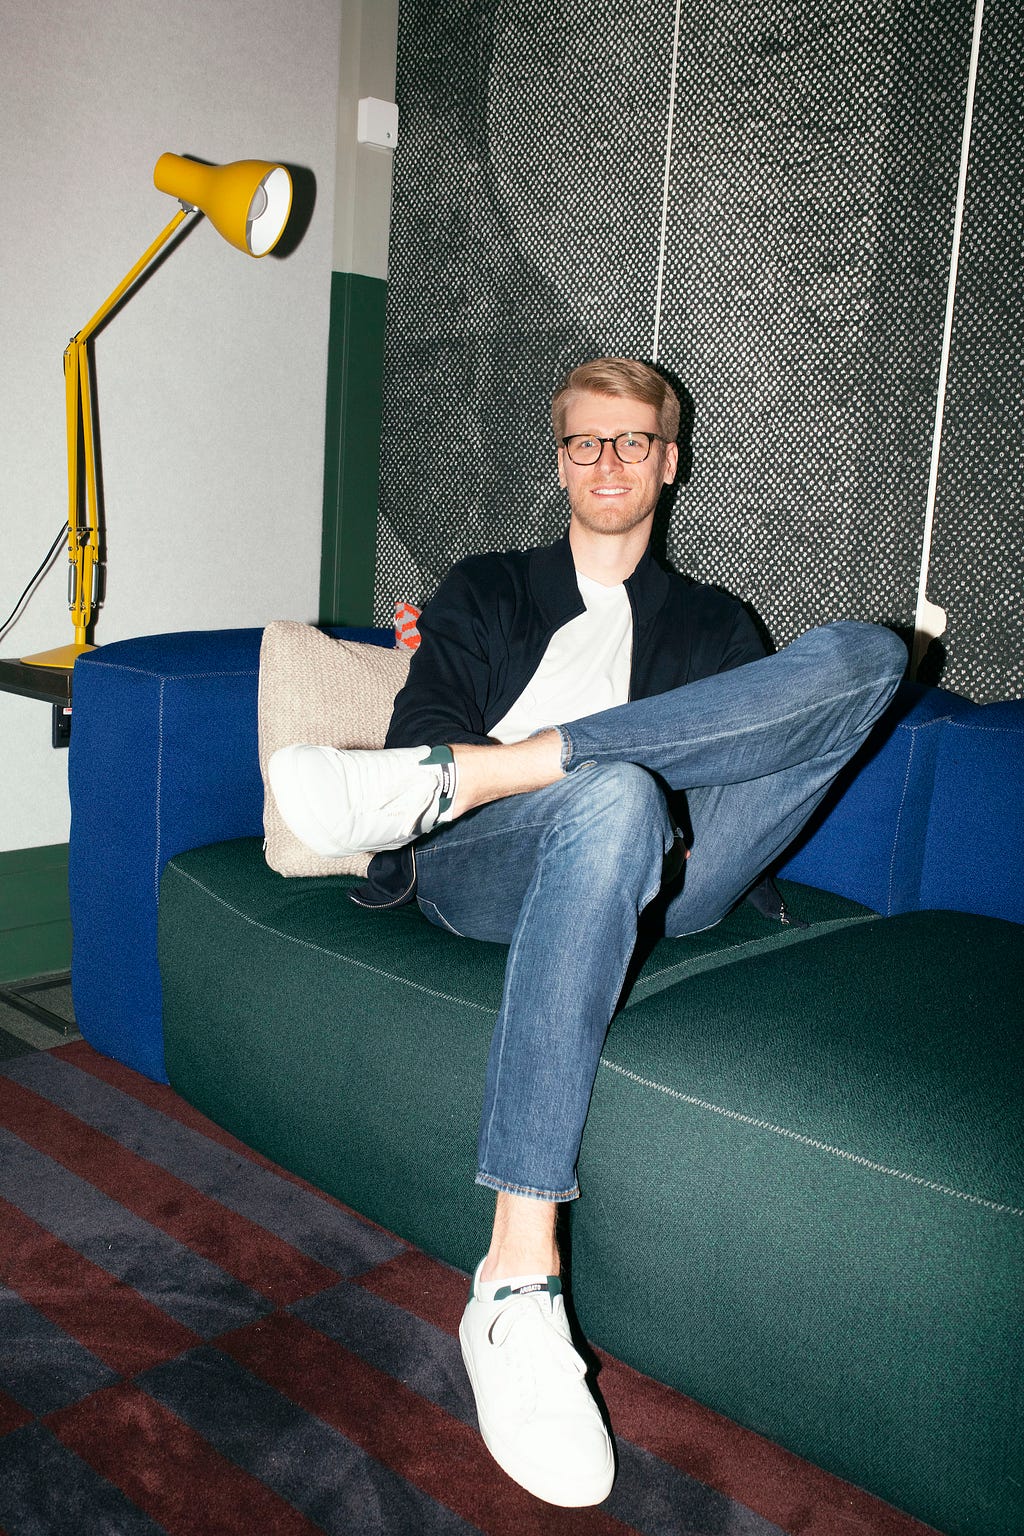 A blond man wearing glasses sitting on a green couch and smiling